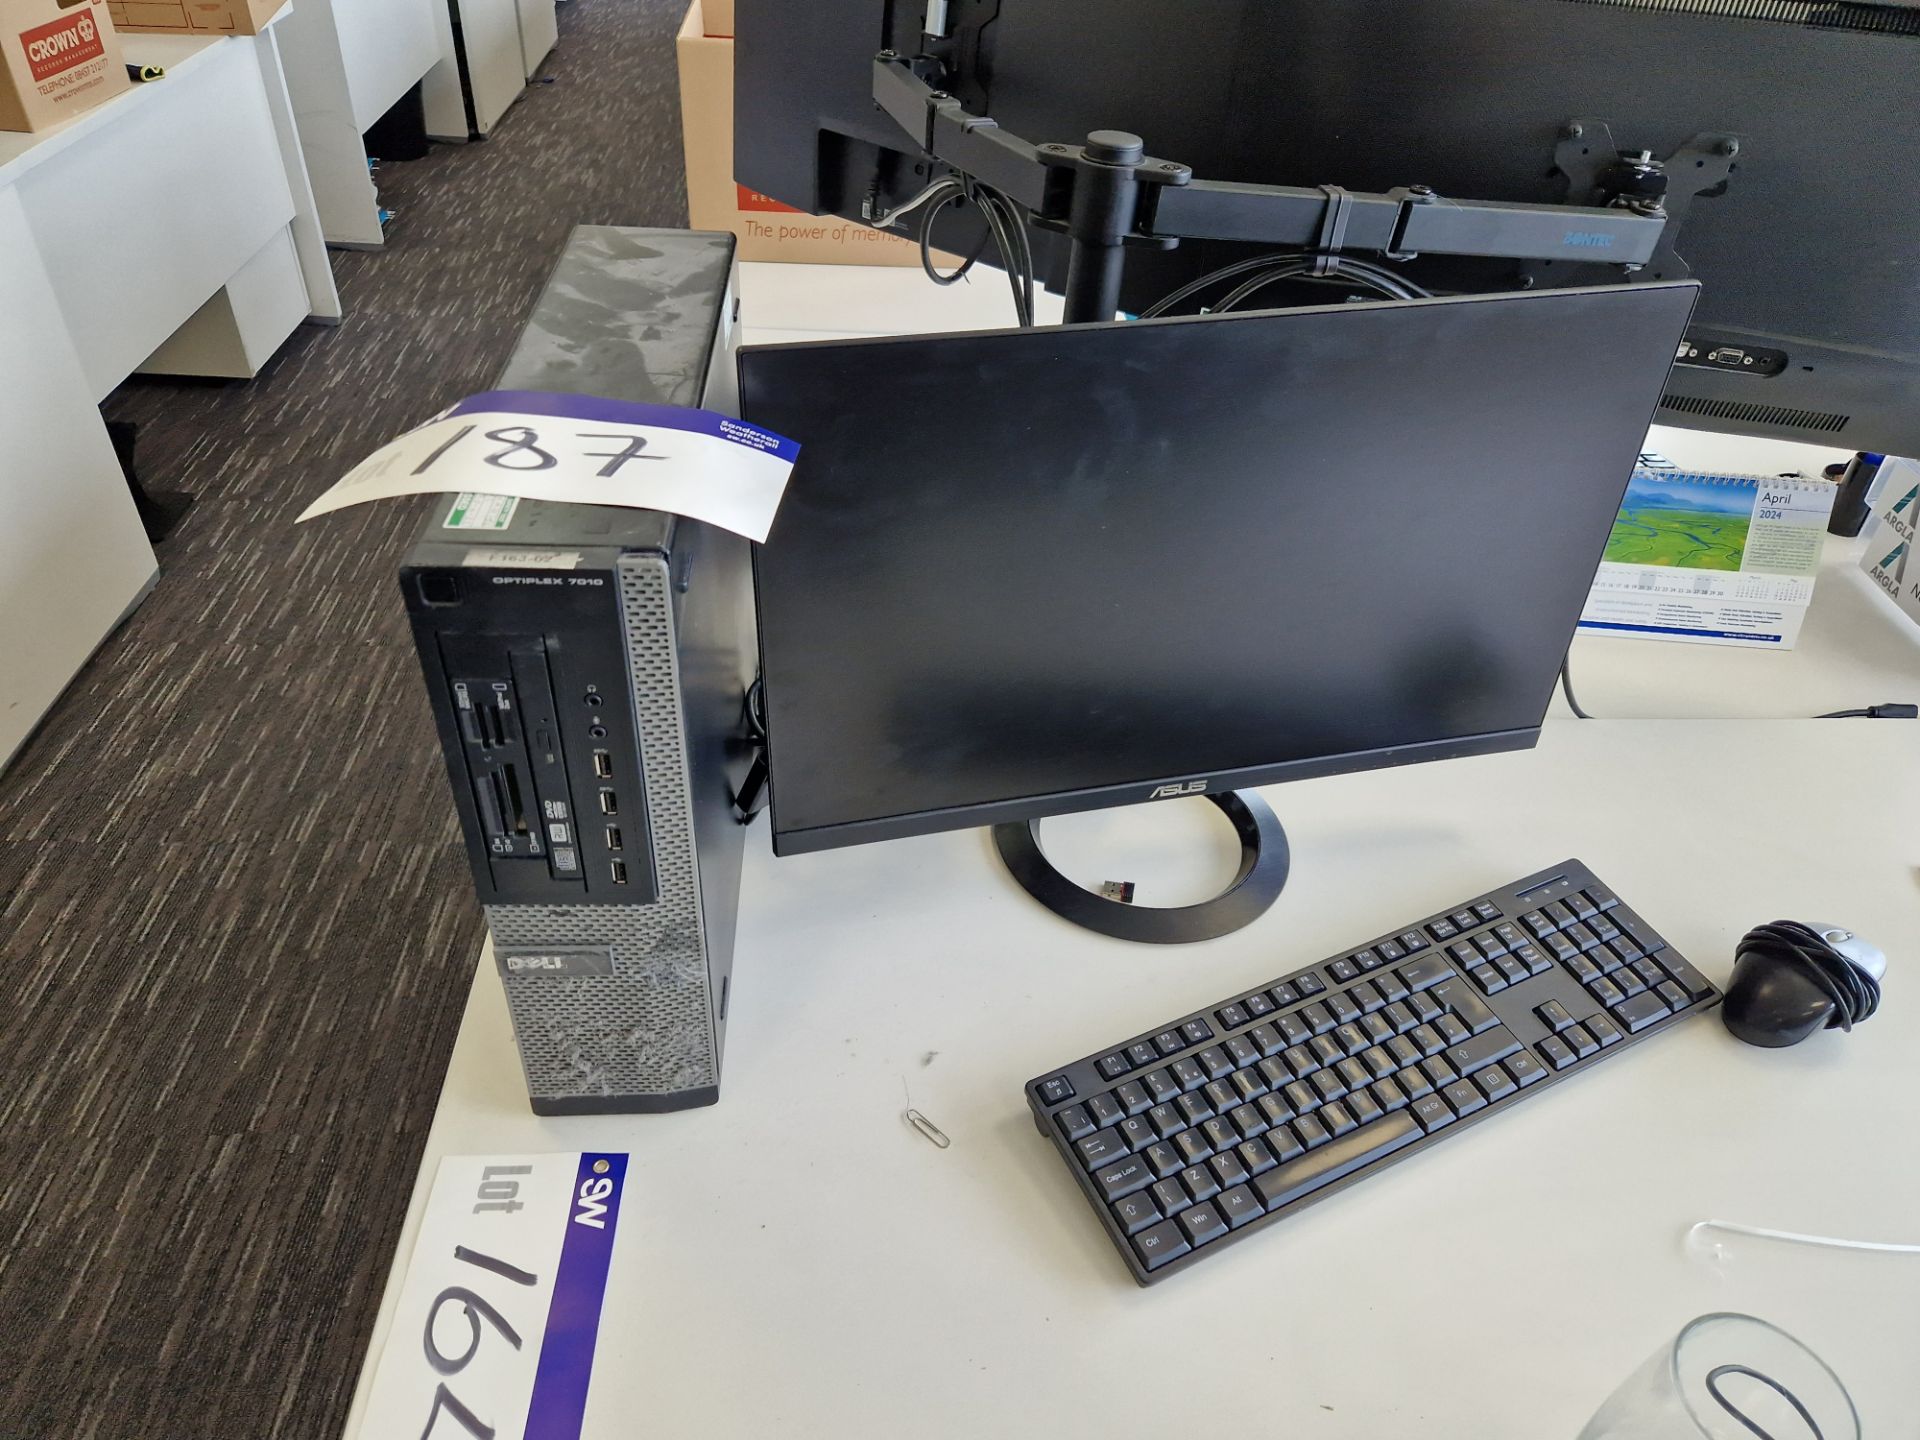 Dell OptiPlex 7010 Desktop PC, Asus Monitor, Keyboard and Mouse (Hard Drive Wiped) Please read the